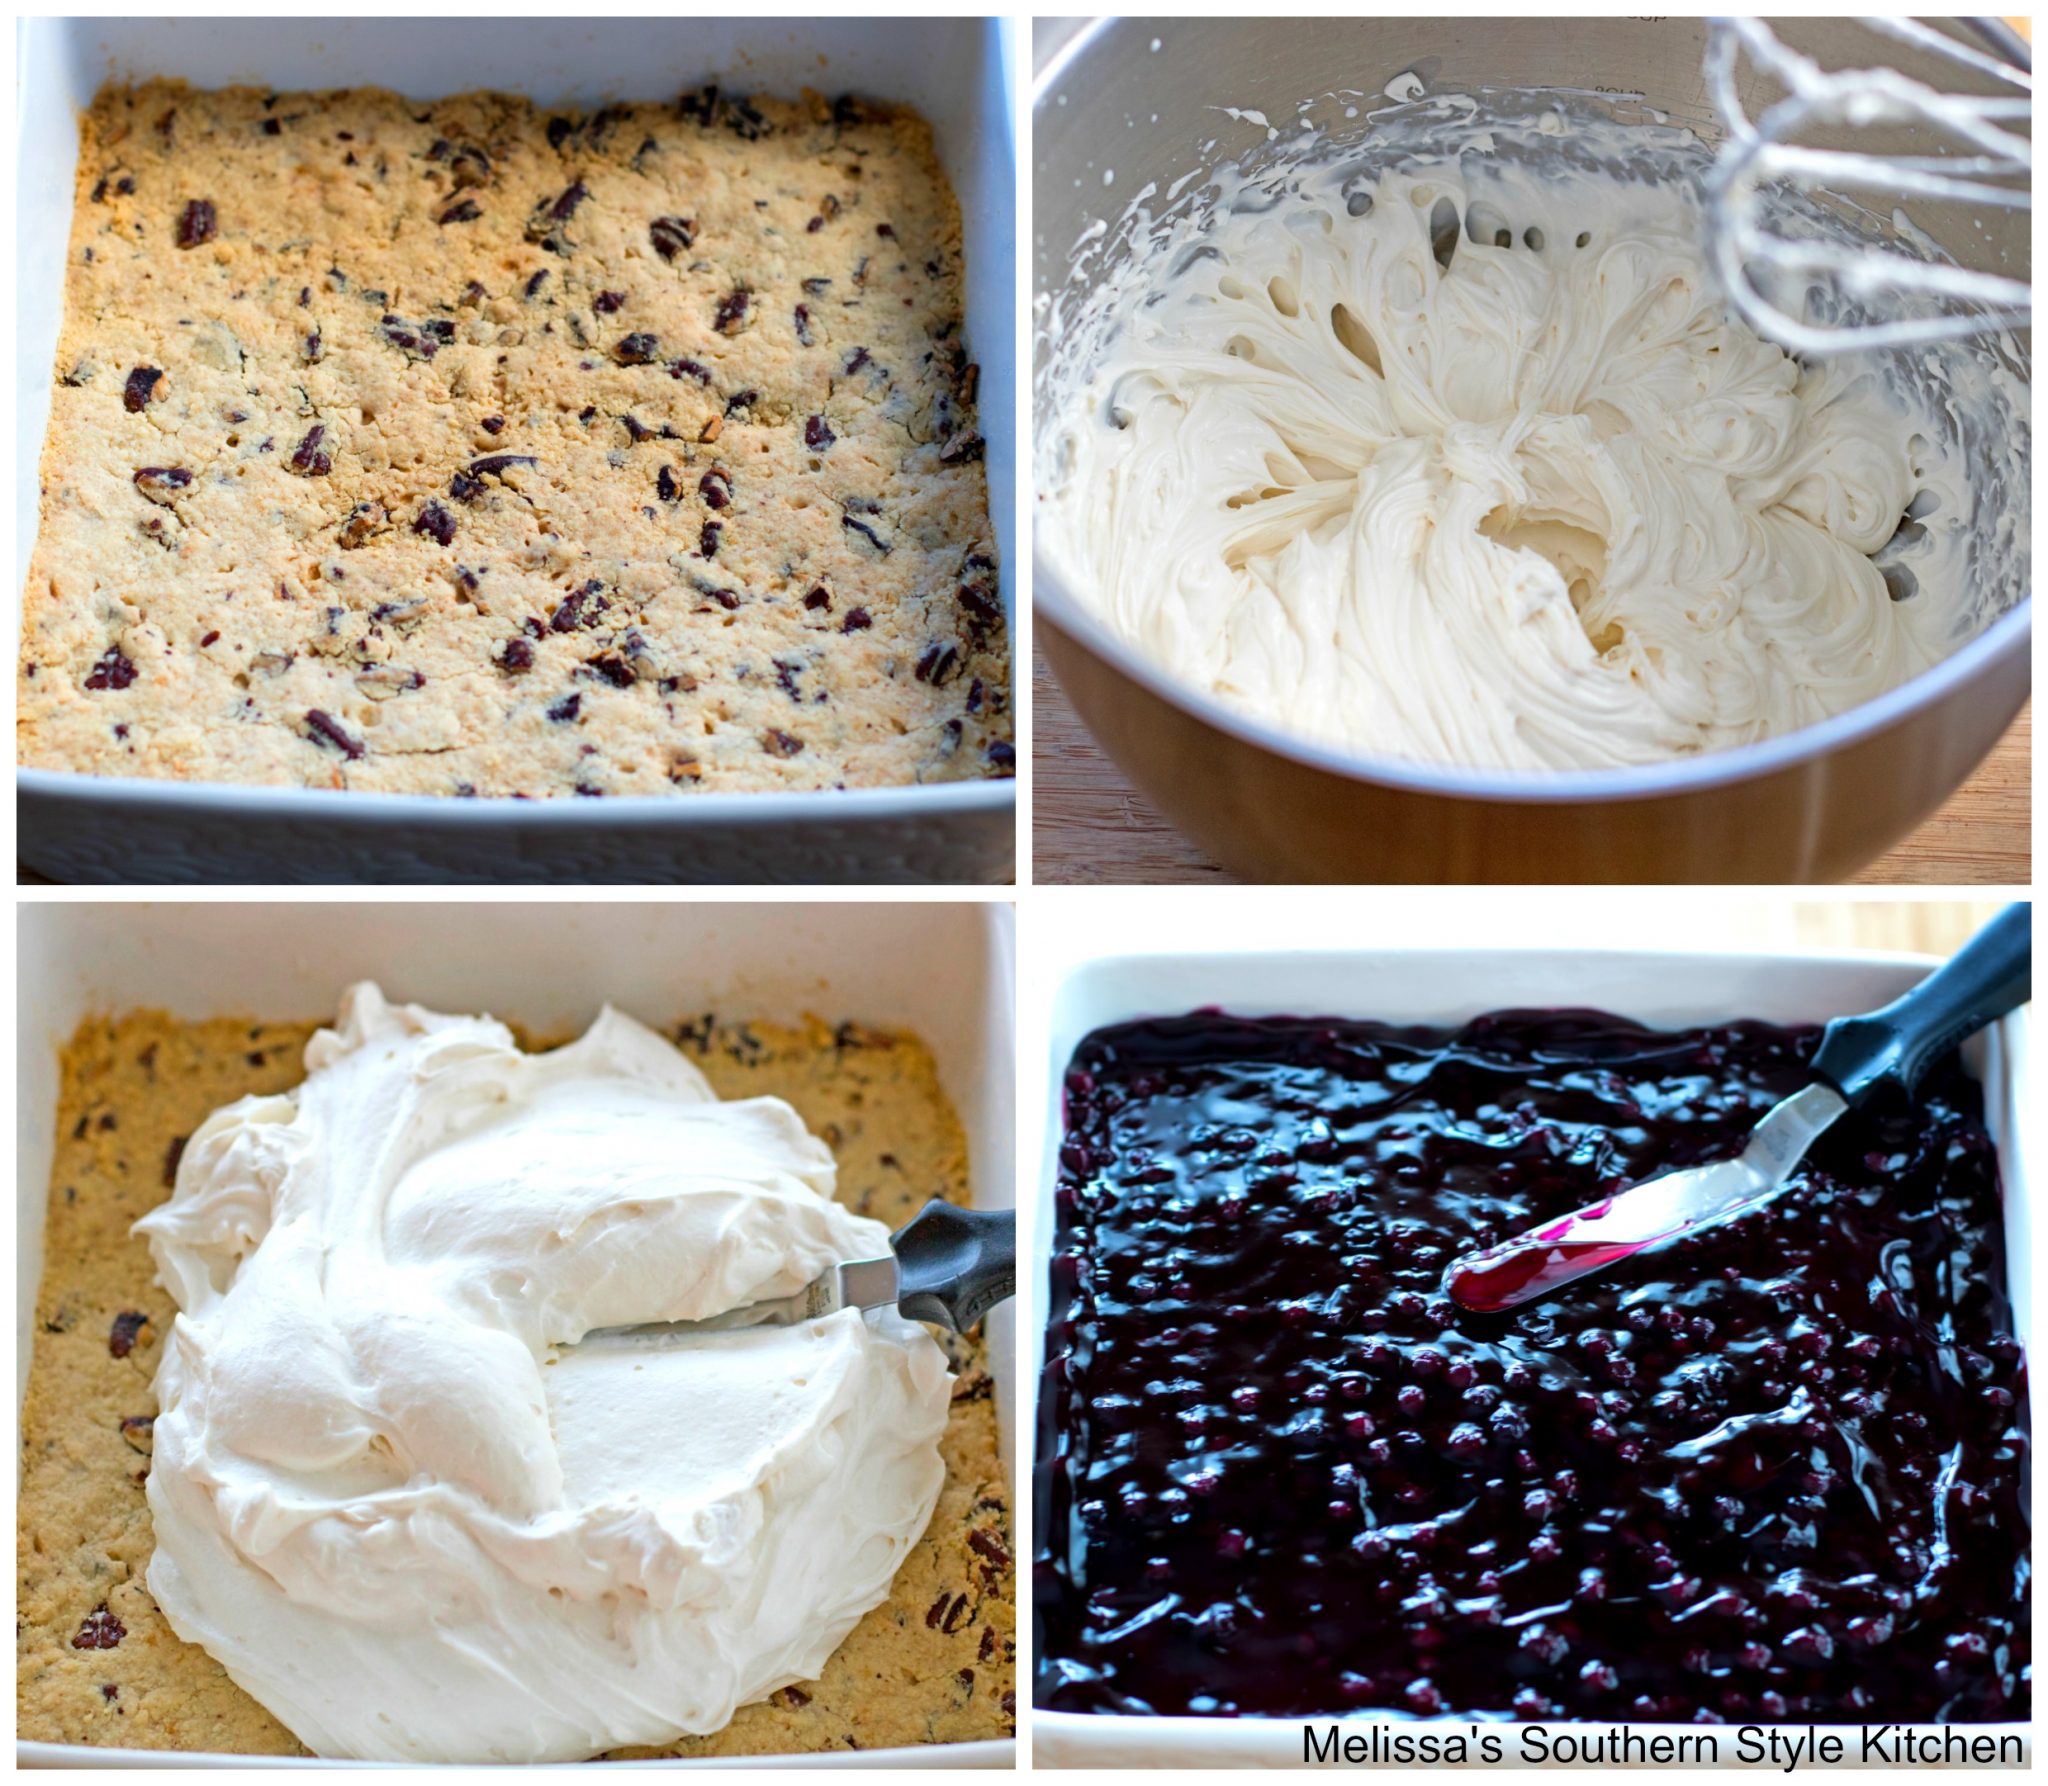 Step-by-step preparation images and ingredients to make Blueberry Yum Yum